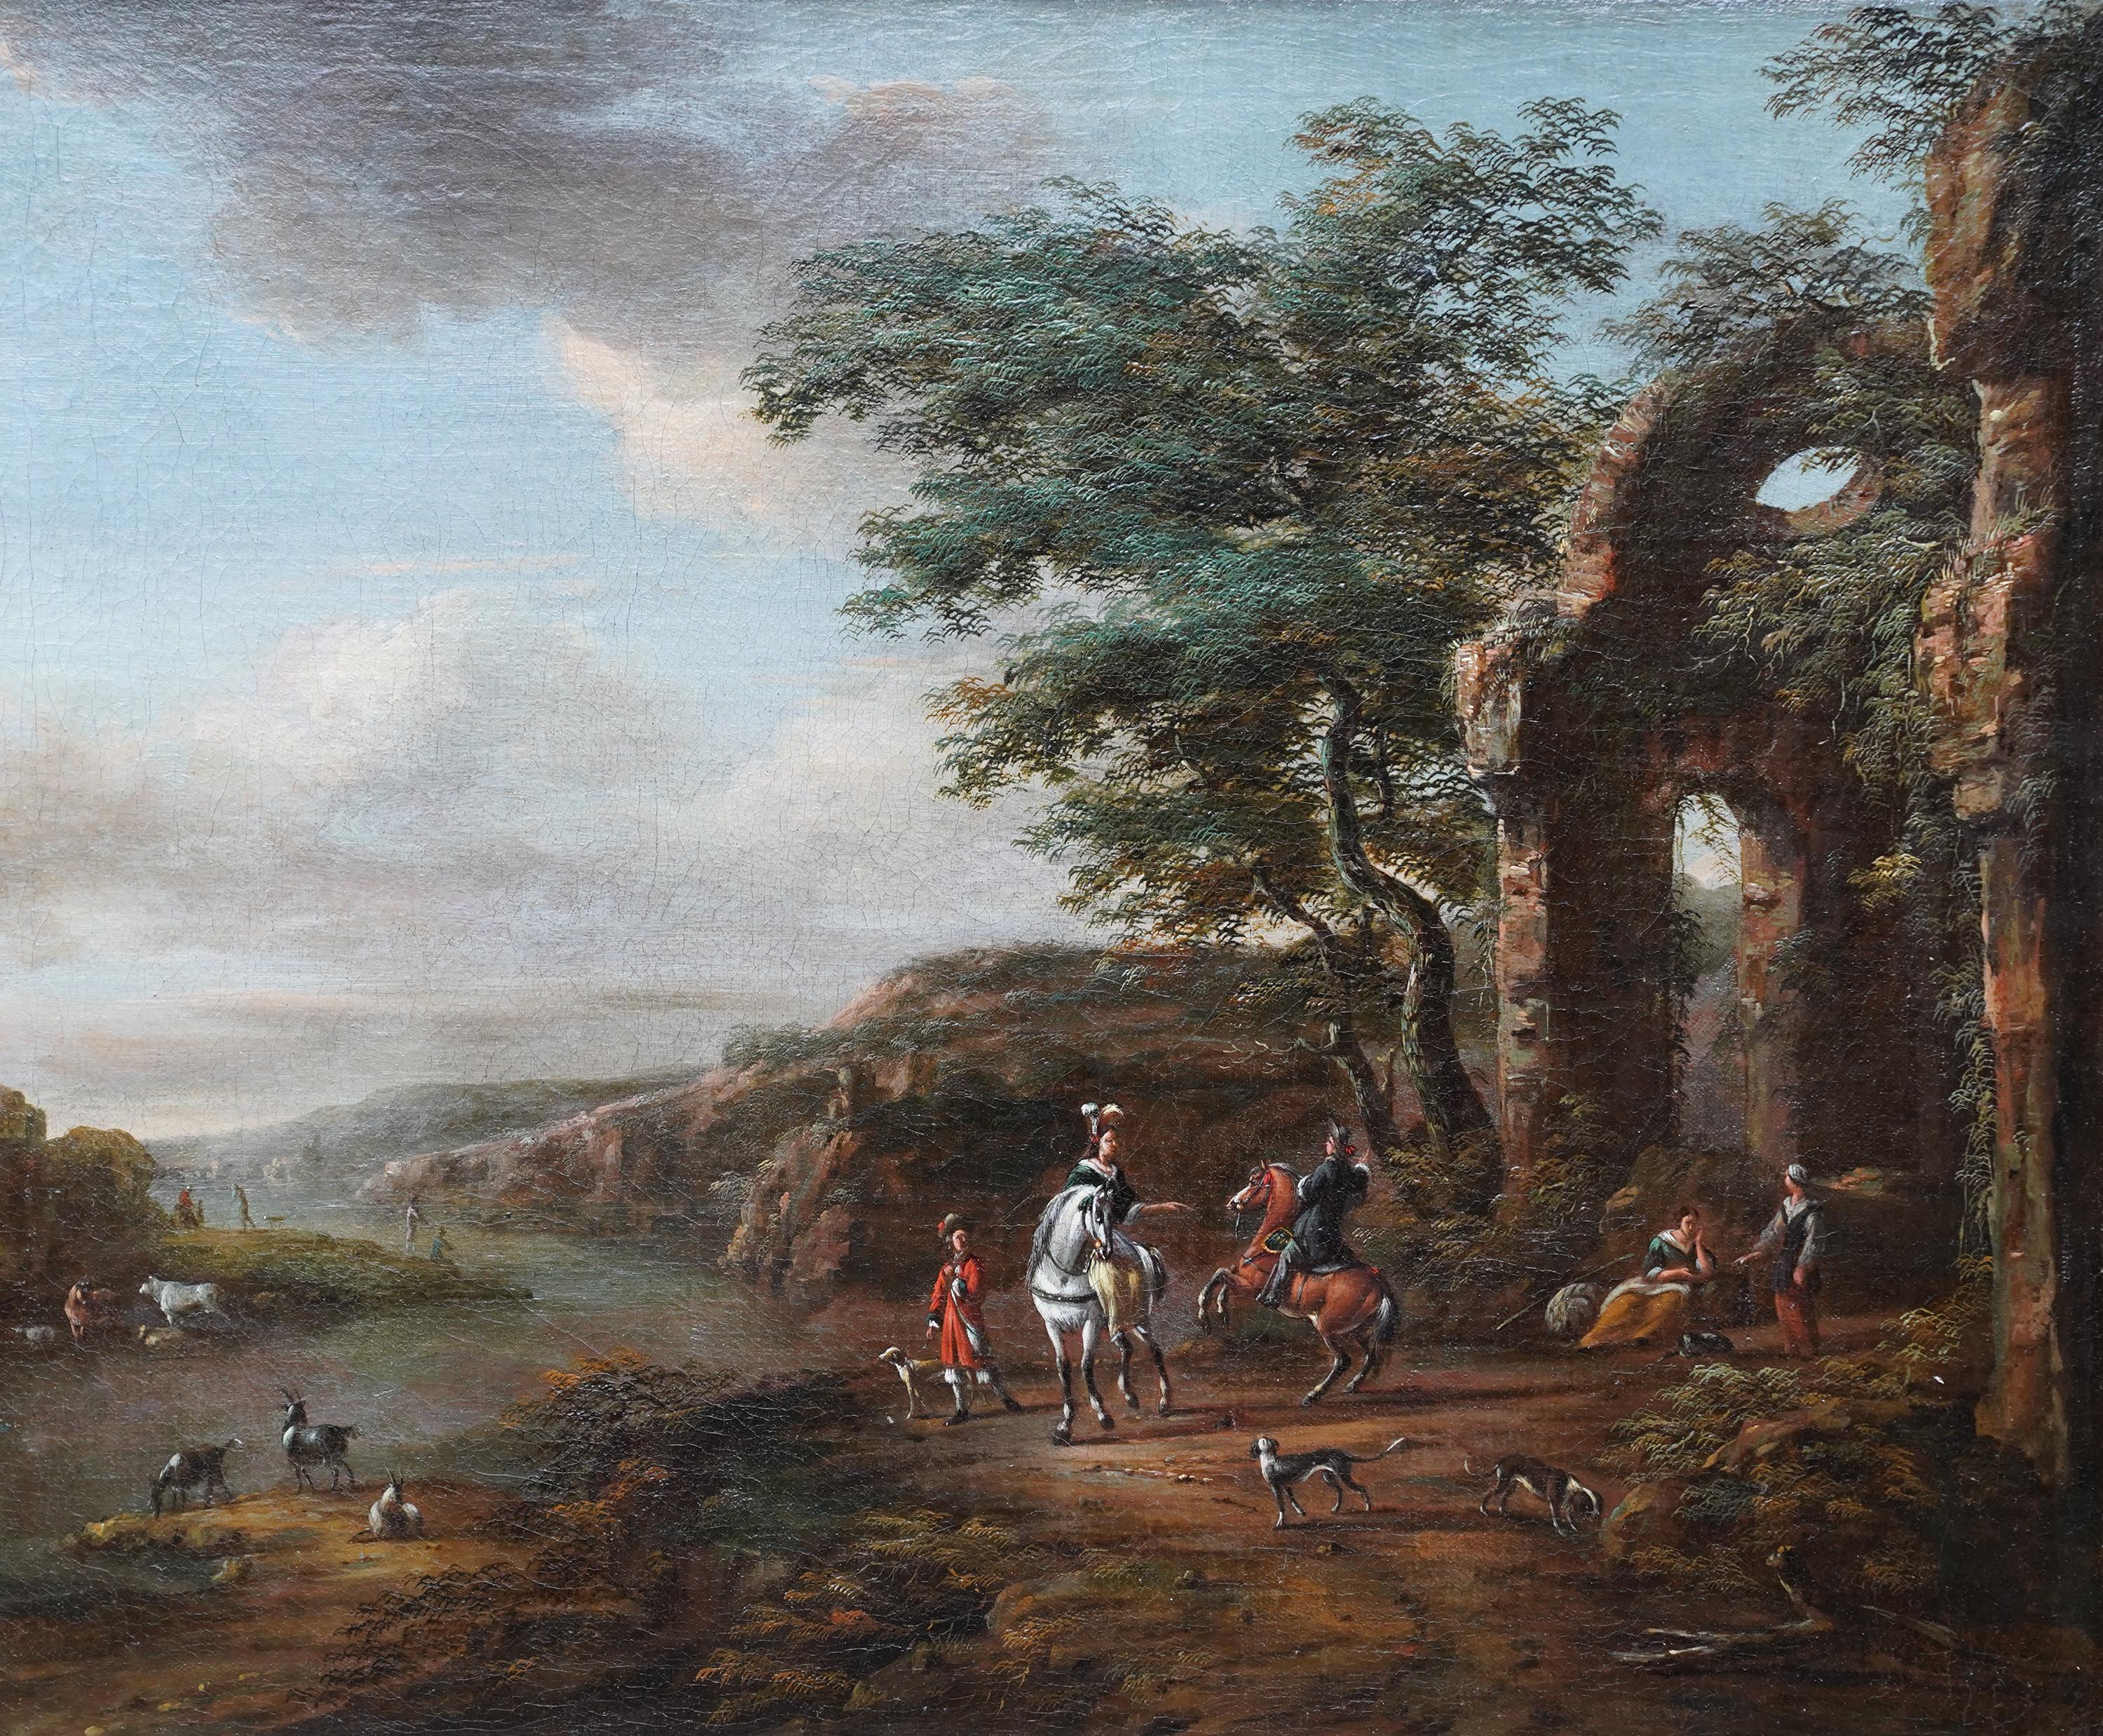 Travellers and Dogs in Landscape, Ruins on Right - Dutch Old Master oil painting - Painting by Pieter Wouwerman